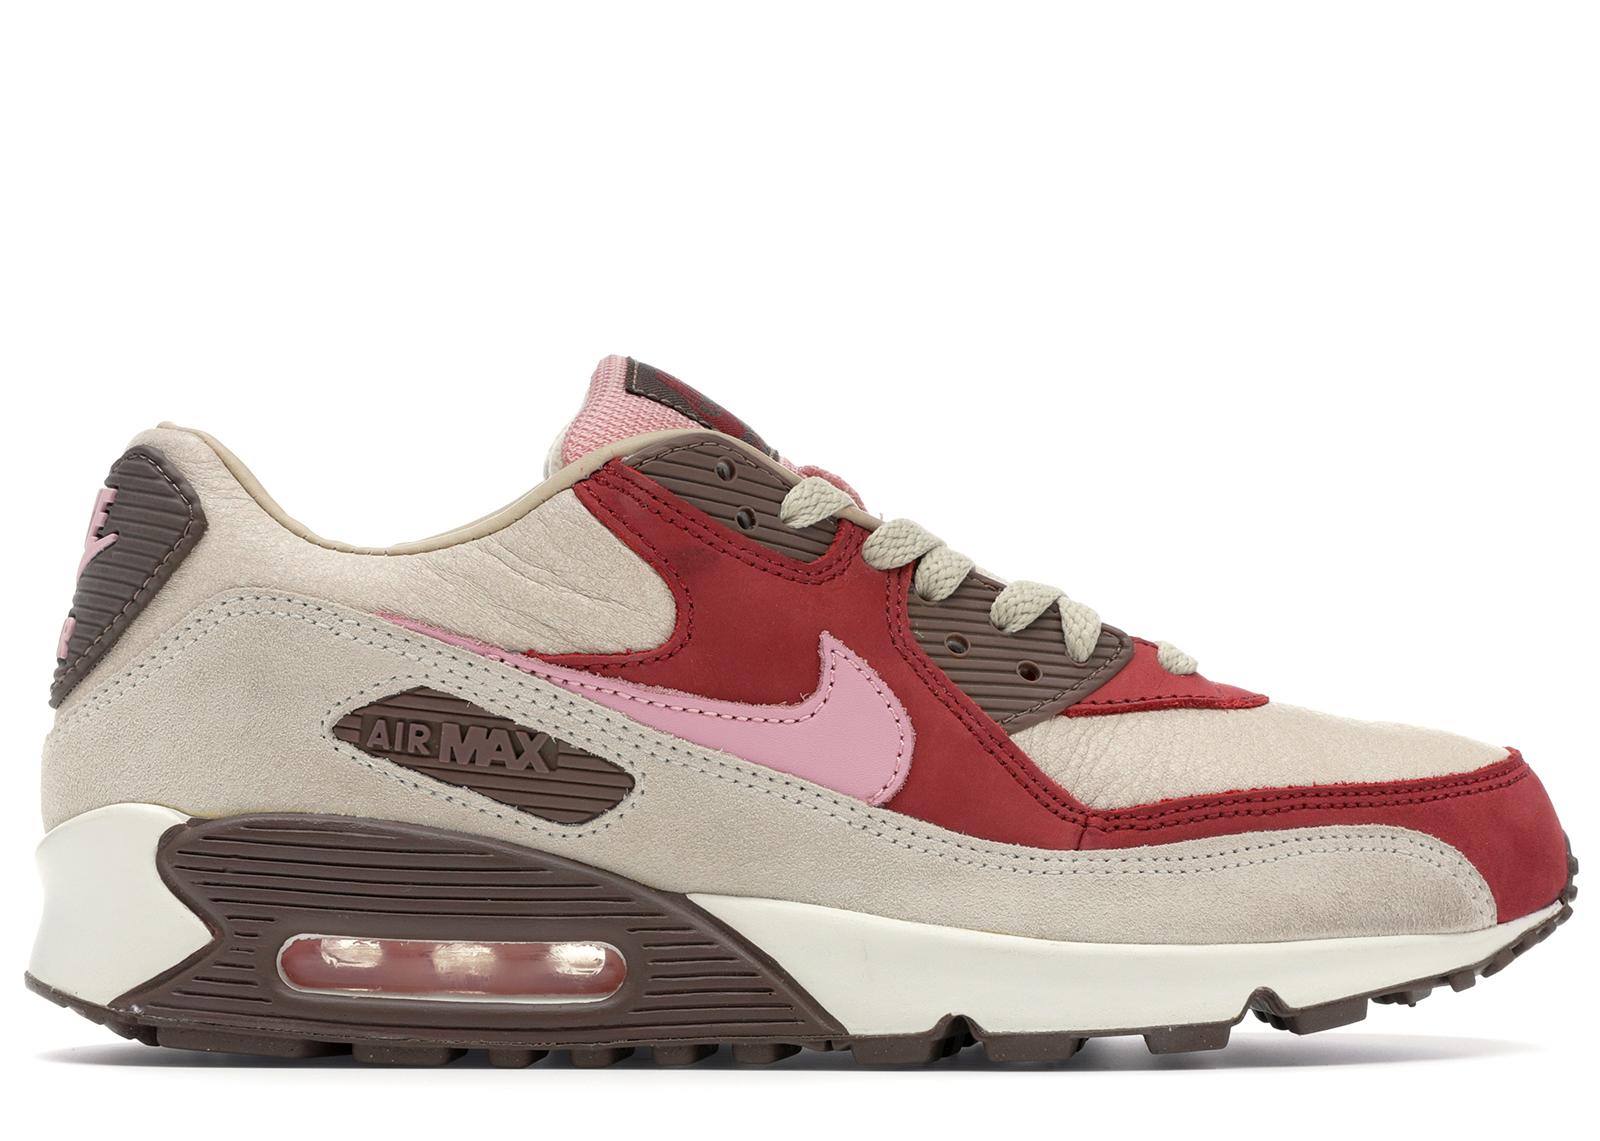 Nike Air Max 90 Dqm Bacon in Brown for Men - Lyst